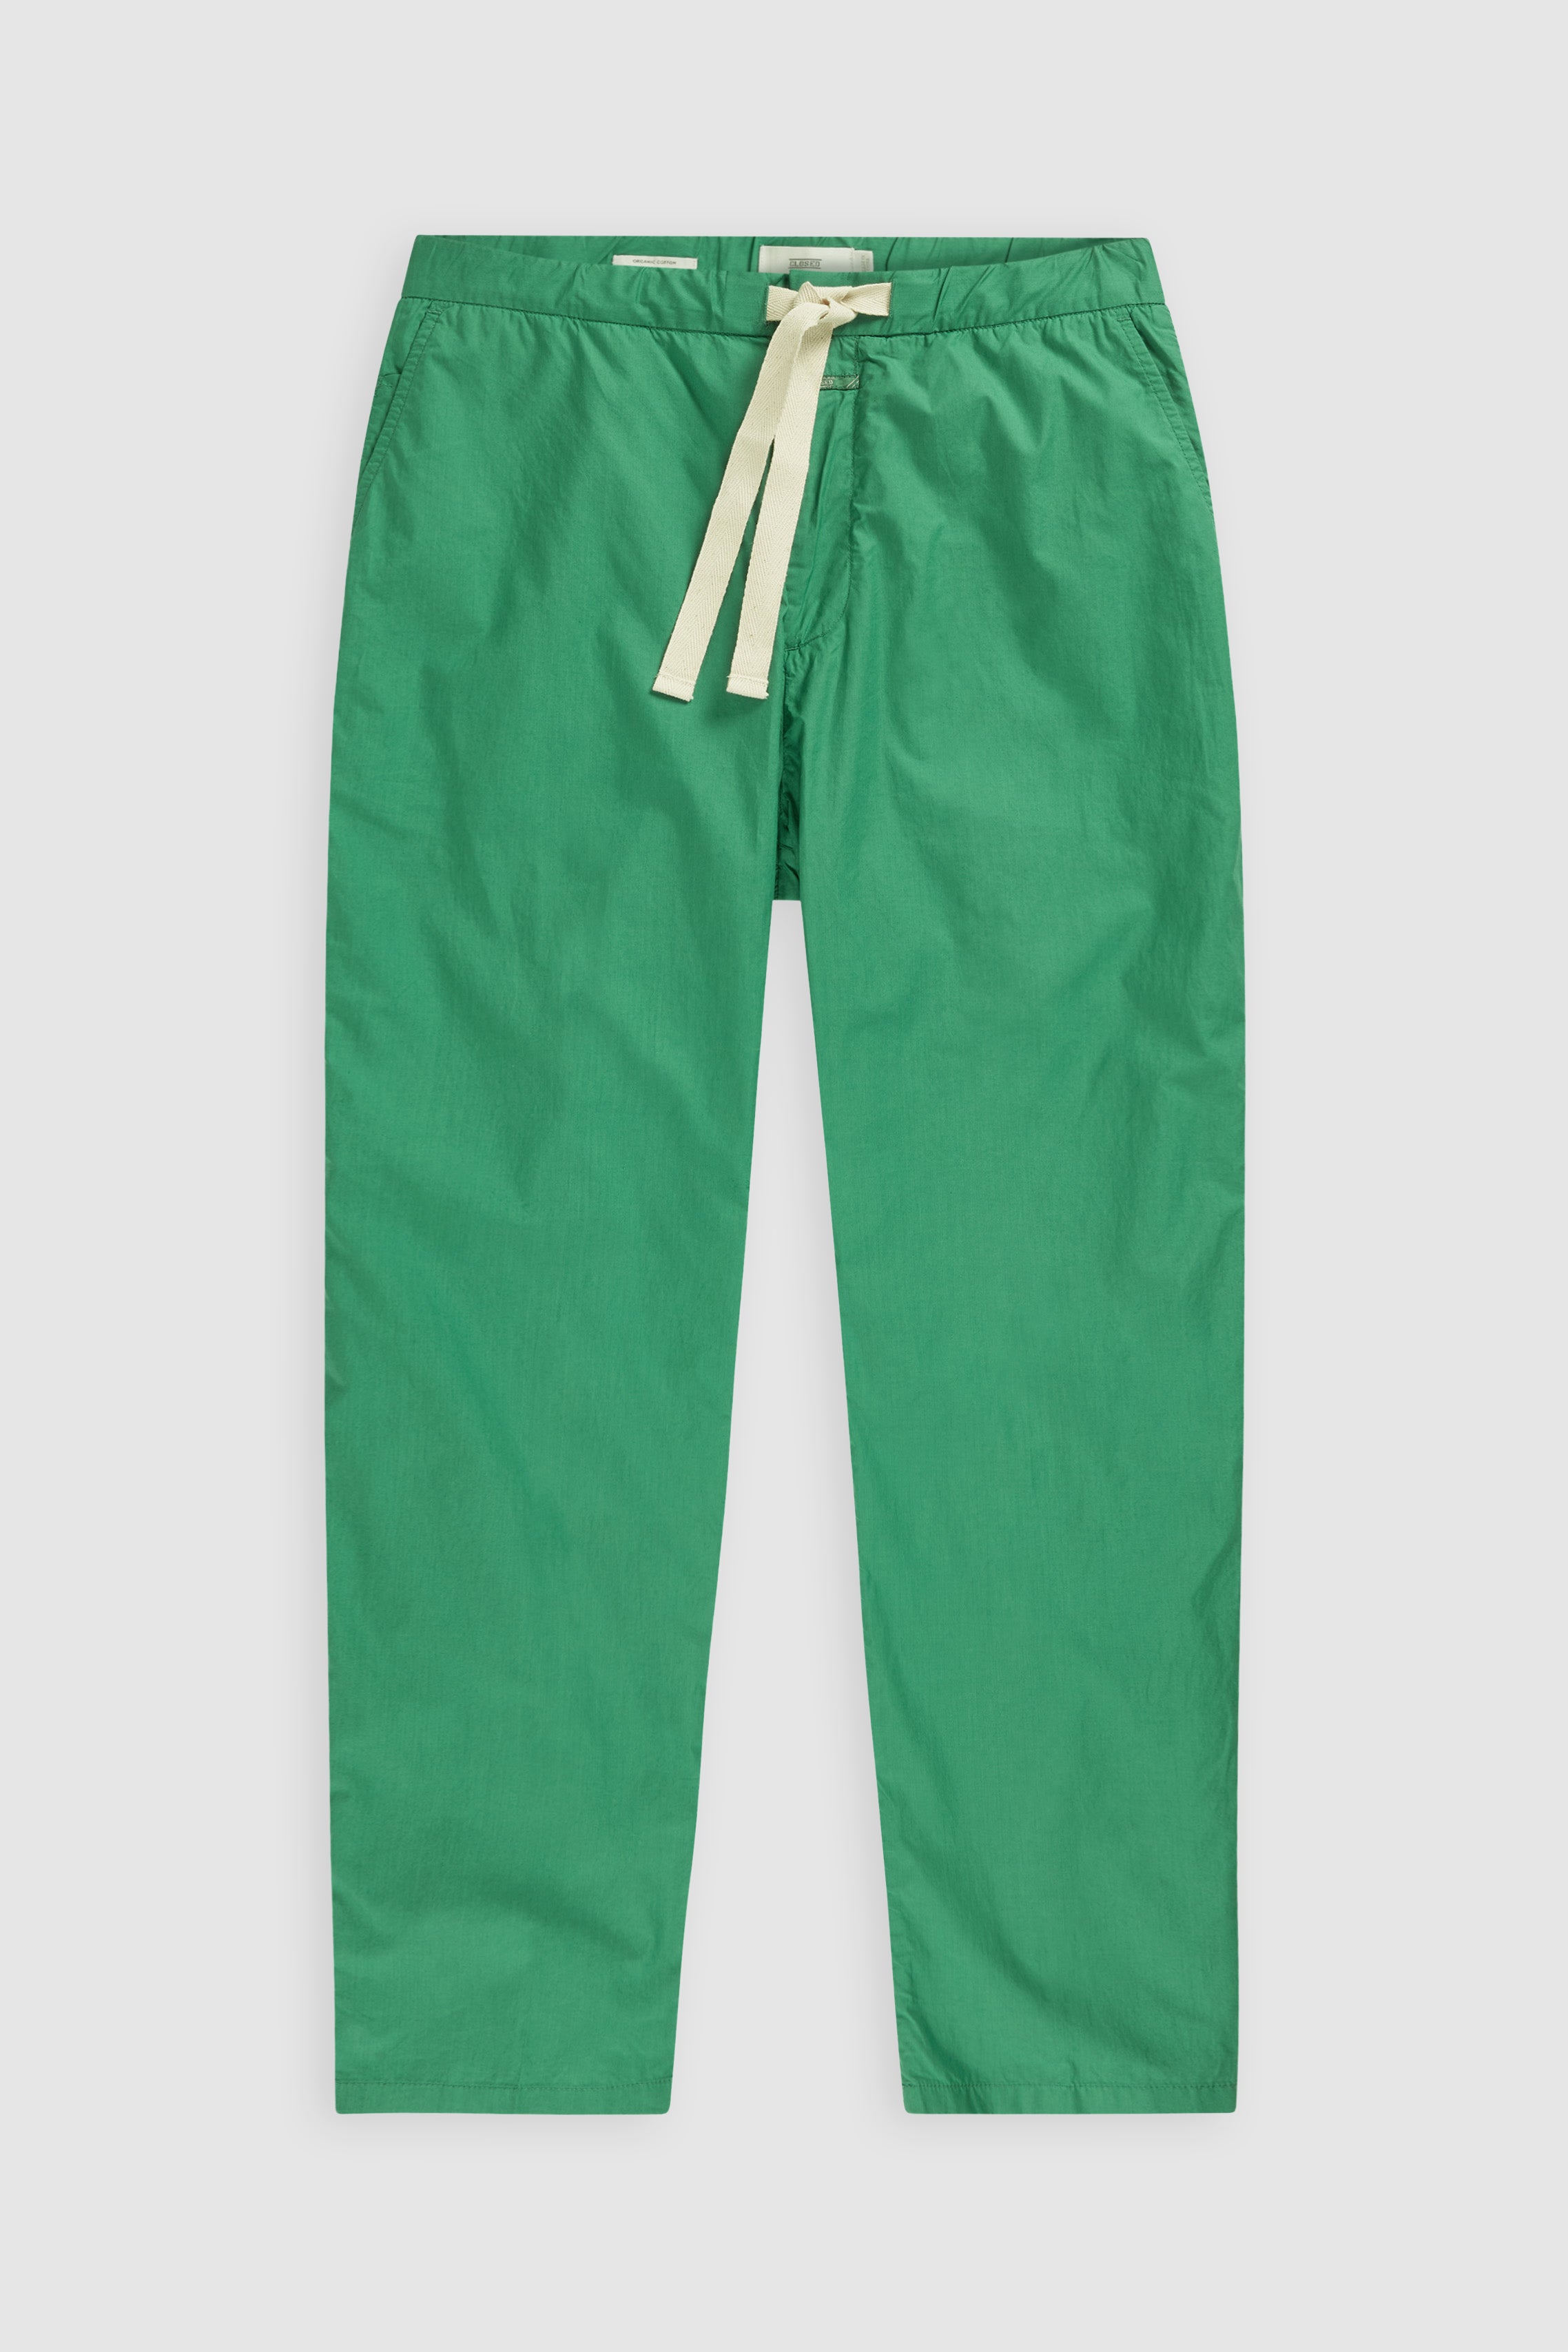 CLOSED-OUTLET-SALE-STYLE-NAME-NANAIMO-STRAIGHT-PANTS-Hosen-ARCHIVE-COLLECTION-4_18e8a176-059e-4251-a57b-26433d3dfc87.jpg